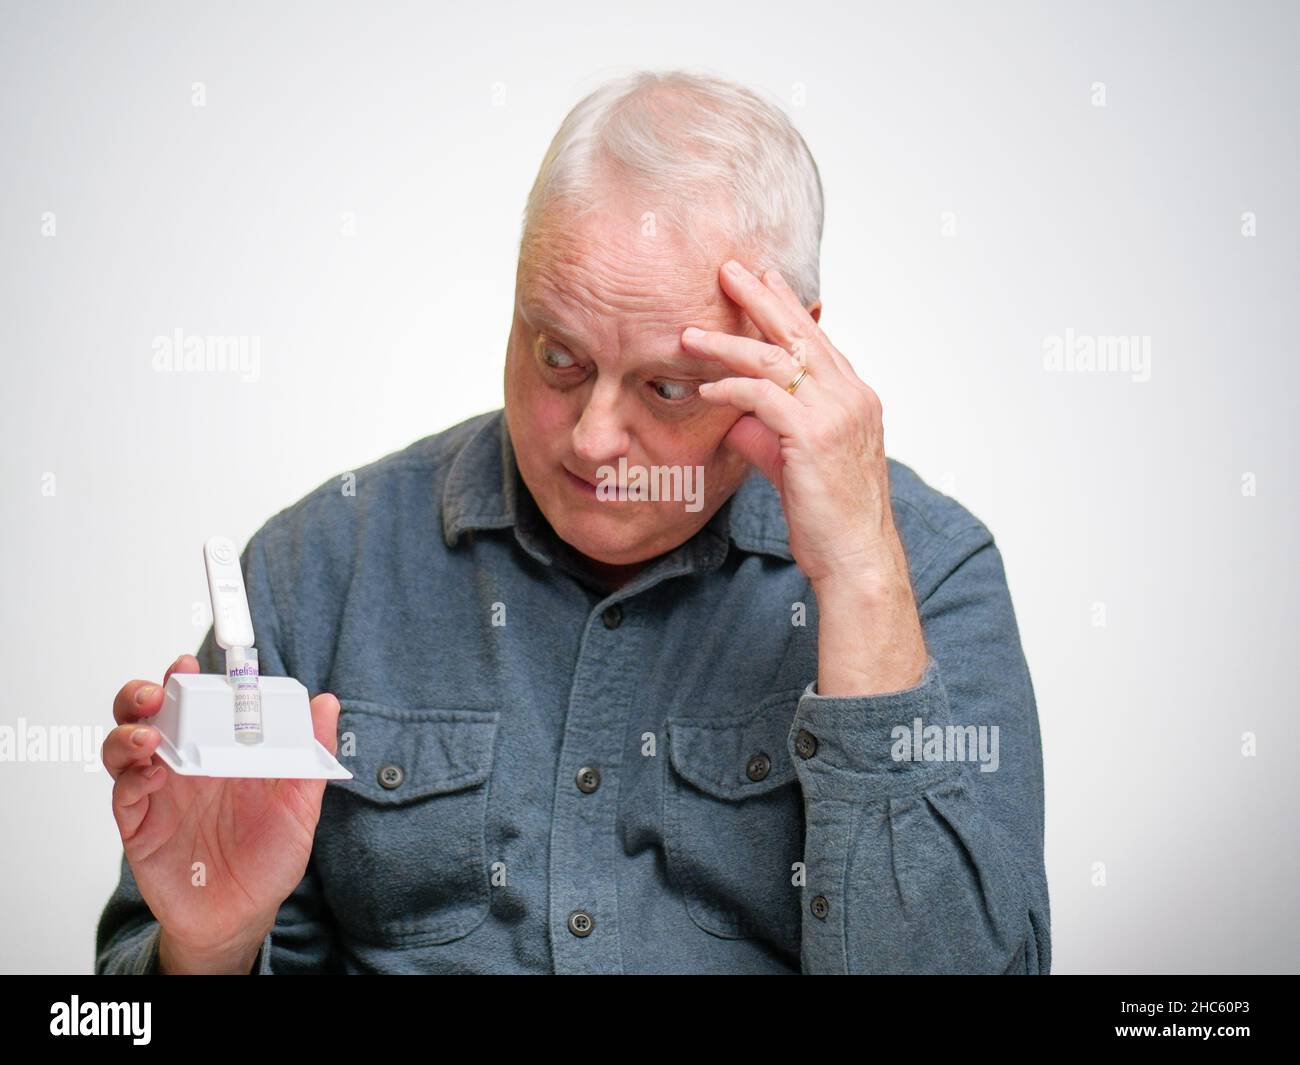 Man with completed home COVID-19 antigen test, concerned look on face. Stock Photo